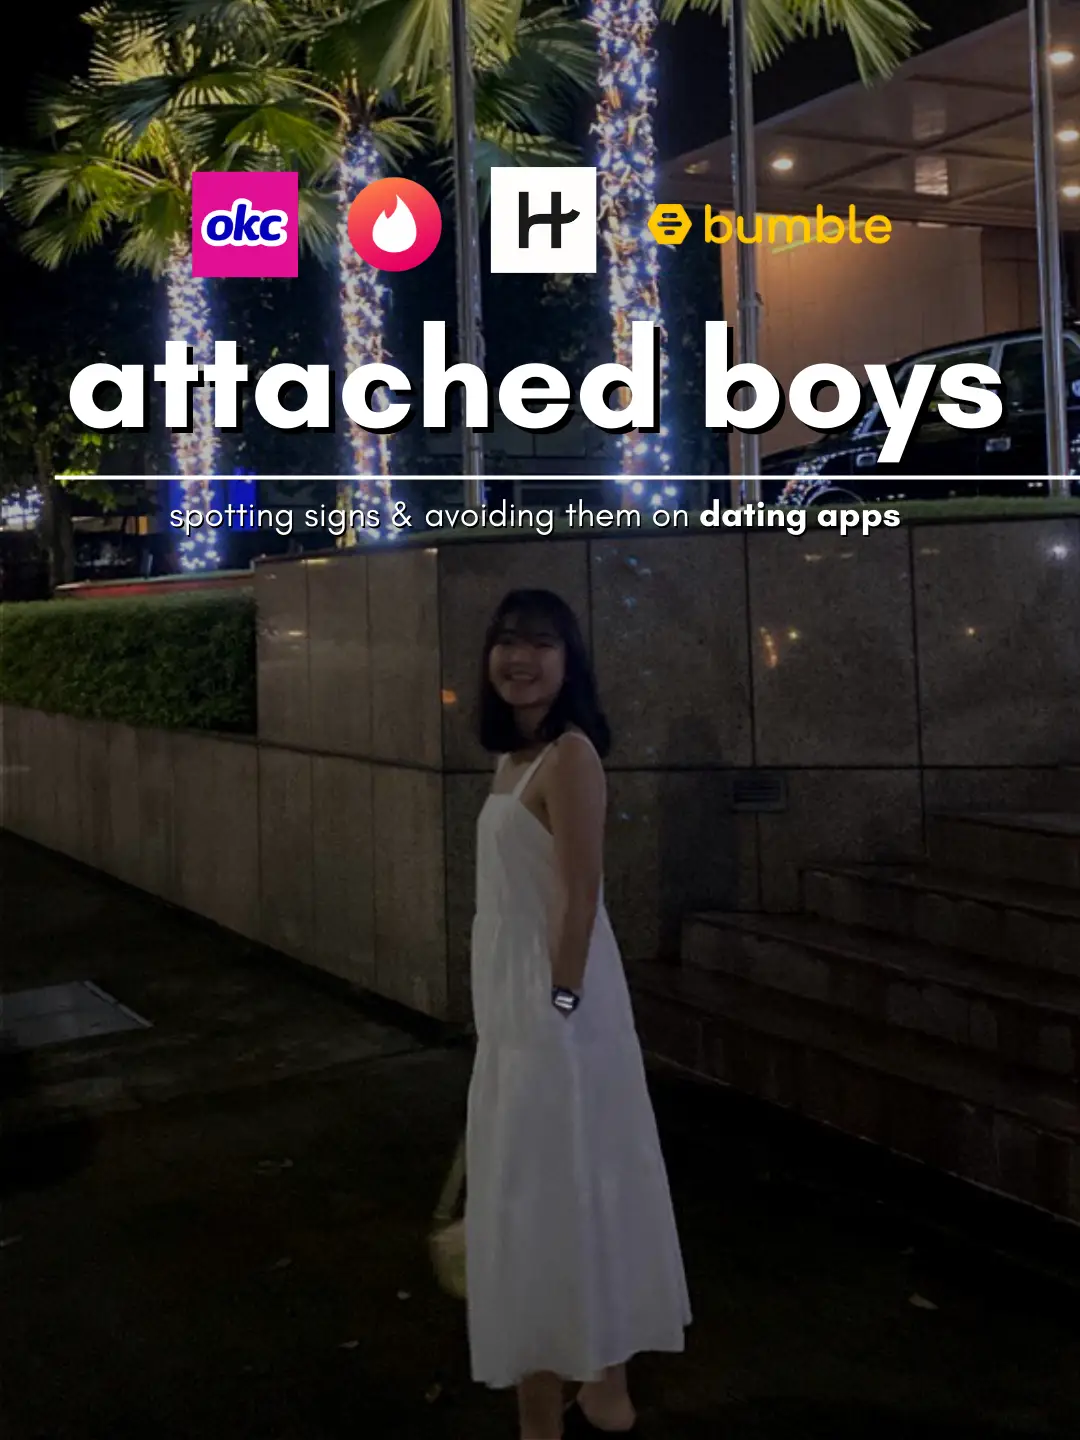 Dating app horror - matching with attached boys 😮‍💨's images(0)